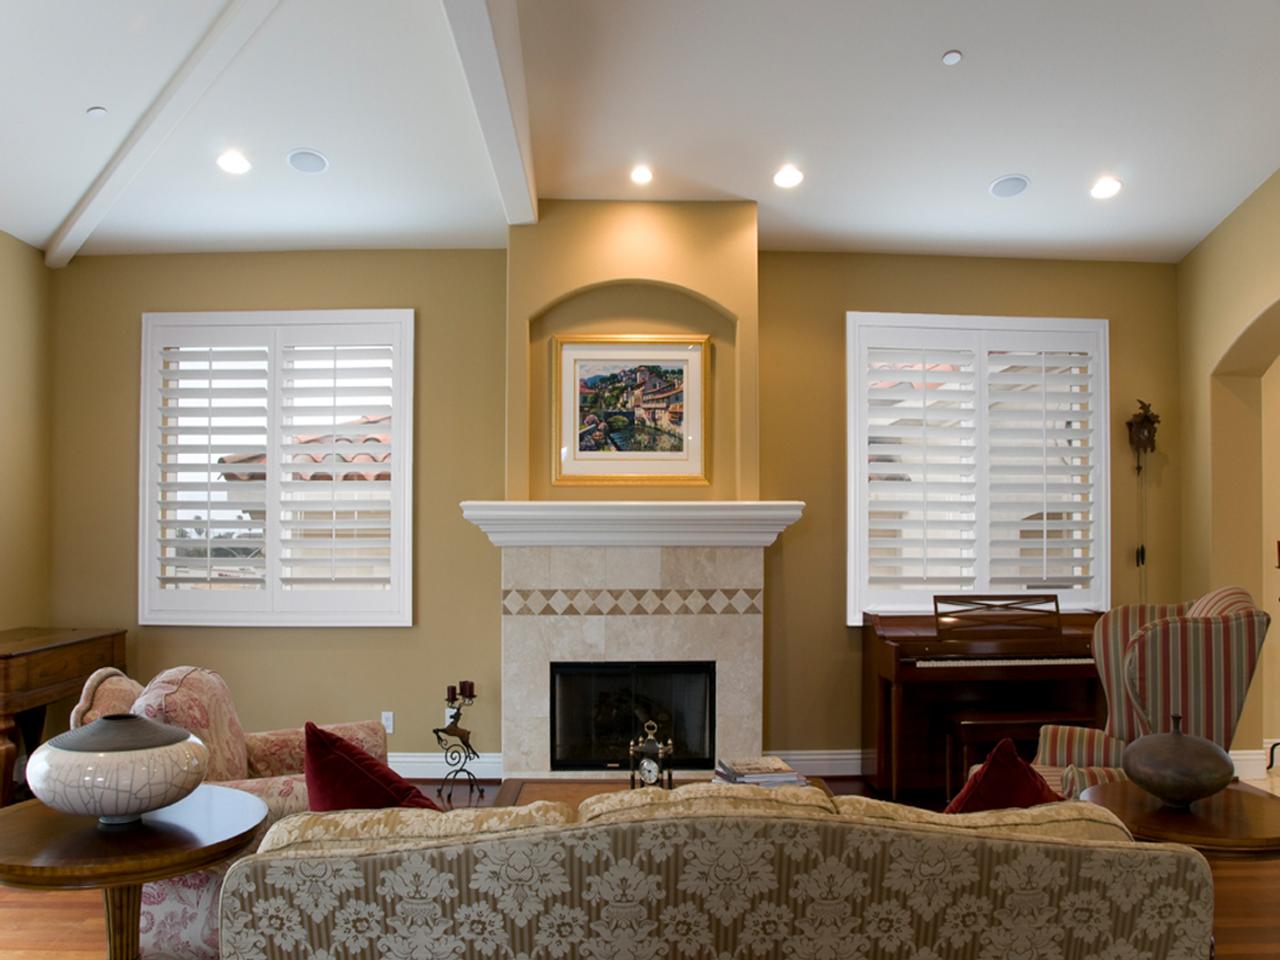 Interior shutters with louvers open in living room